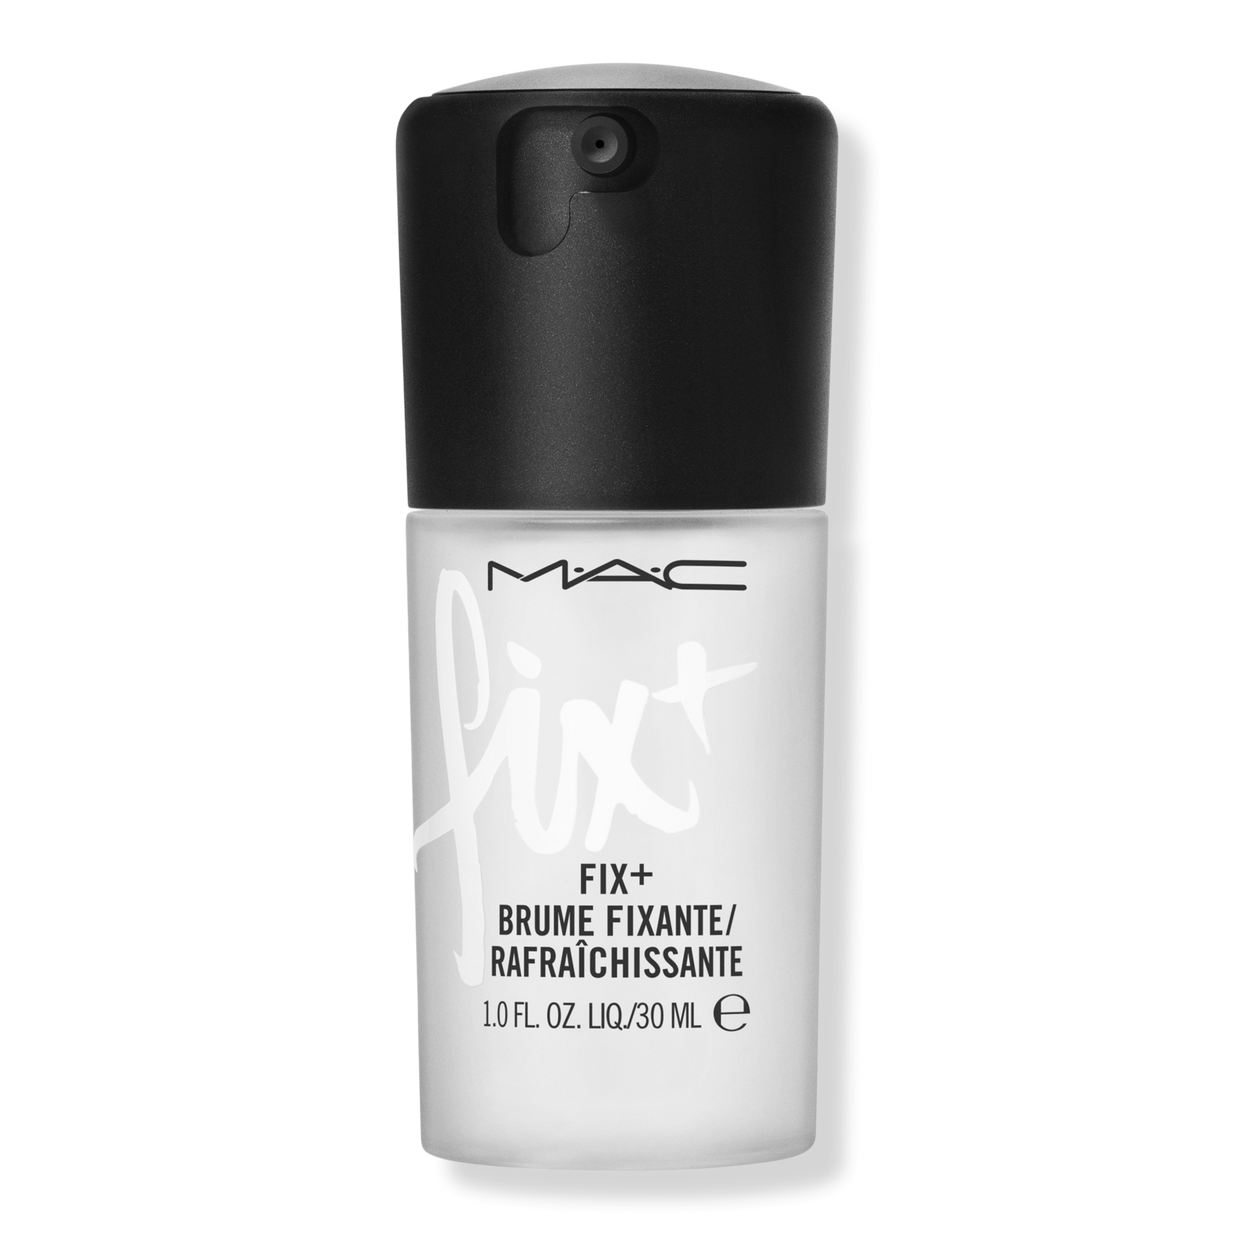  MAKE UP FOR EVER Mist & Fix Make-Up Setting Spray 1.01 fl. oz.  Travel Size : Beauty & Personal Care